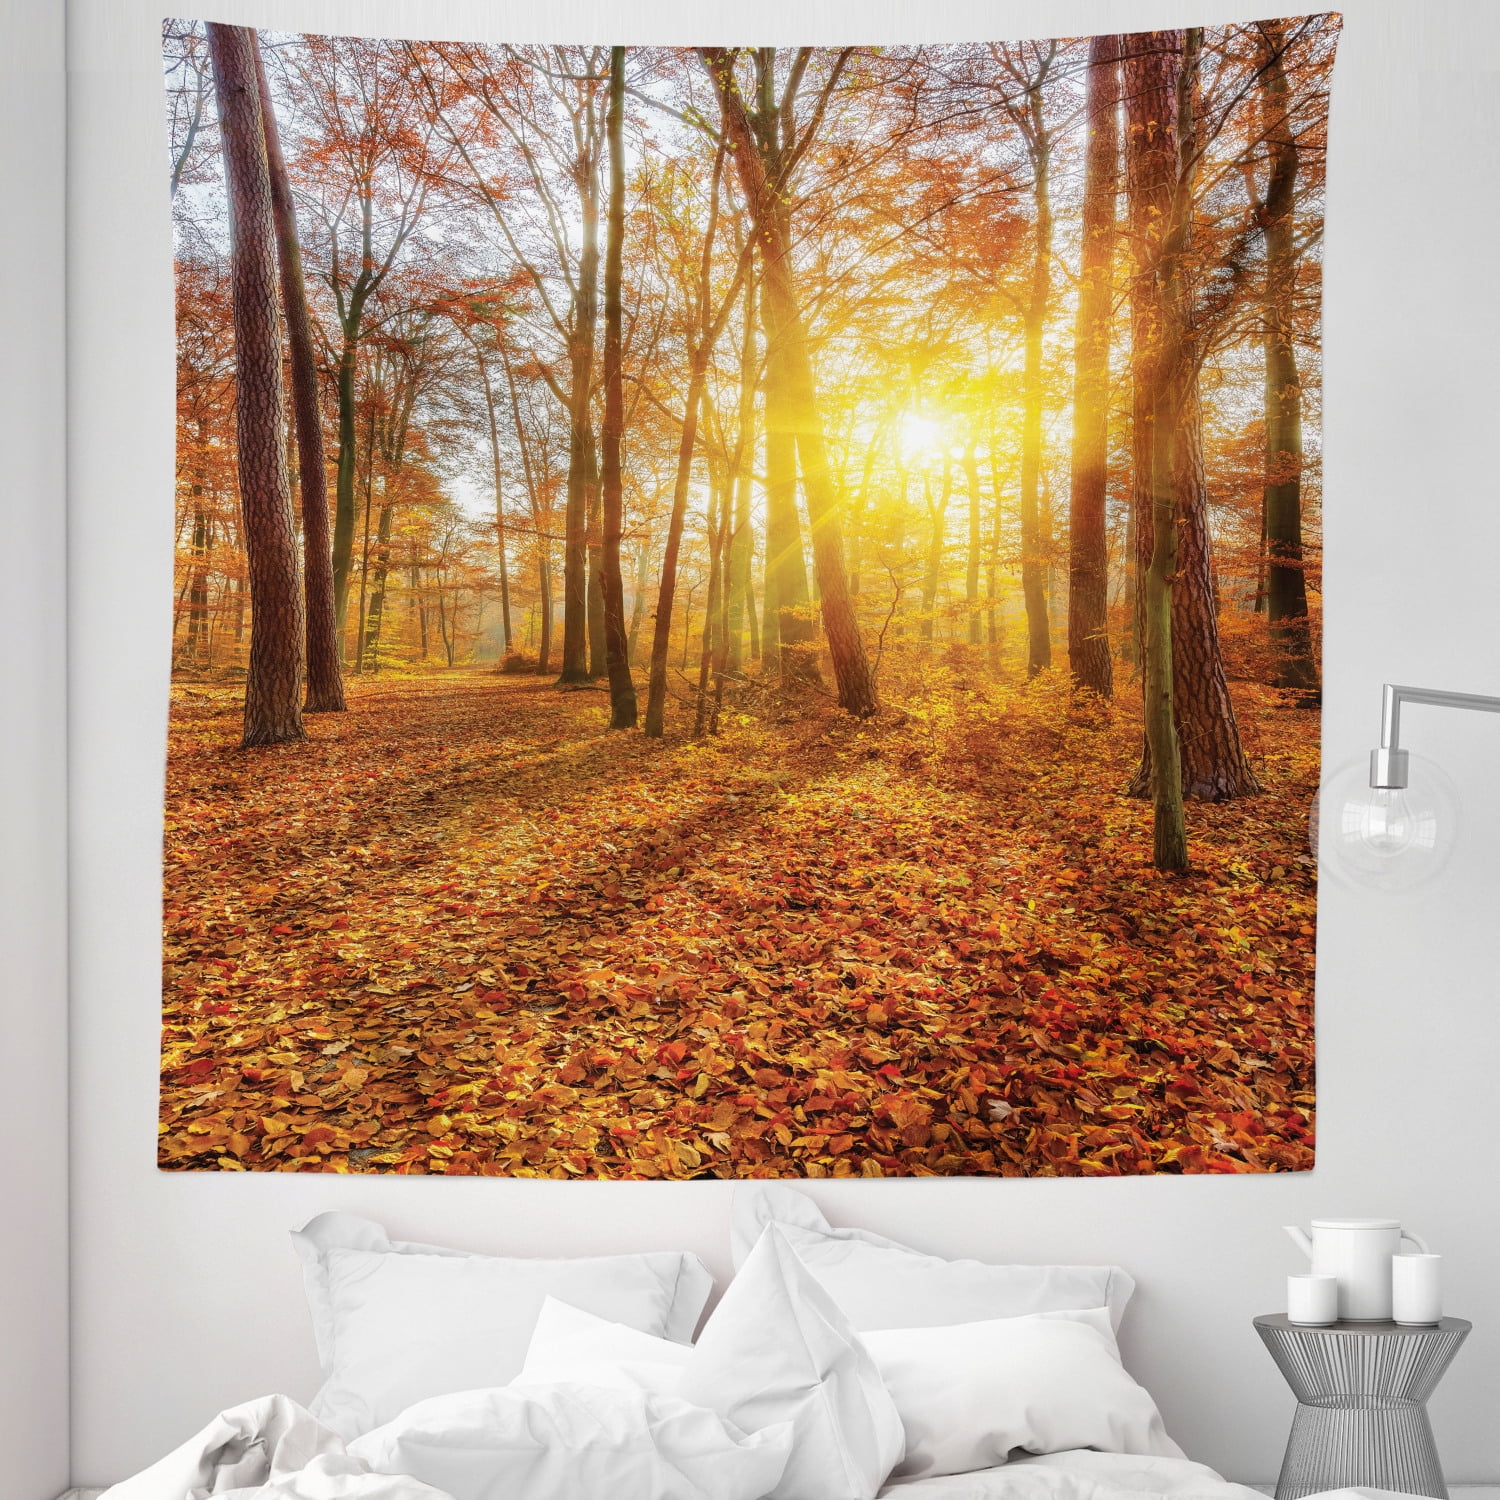 Nature Tapestry, Foggy Sunset Vibrant Sunbeams Rural Country Woodland in Fall  Scenery Image, Fabric Wall Hanging Decor for Bedroom Living Room Dorm,  Sizes, Orange Brown Yellow, by Ambesonne